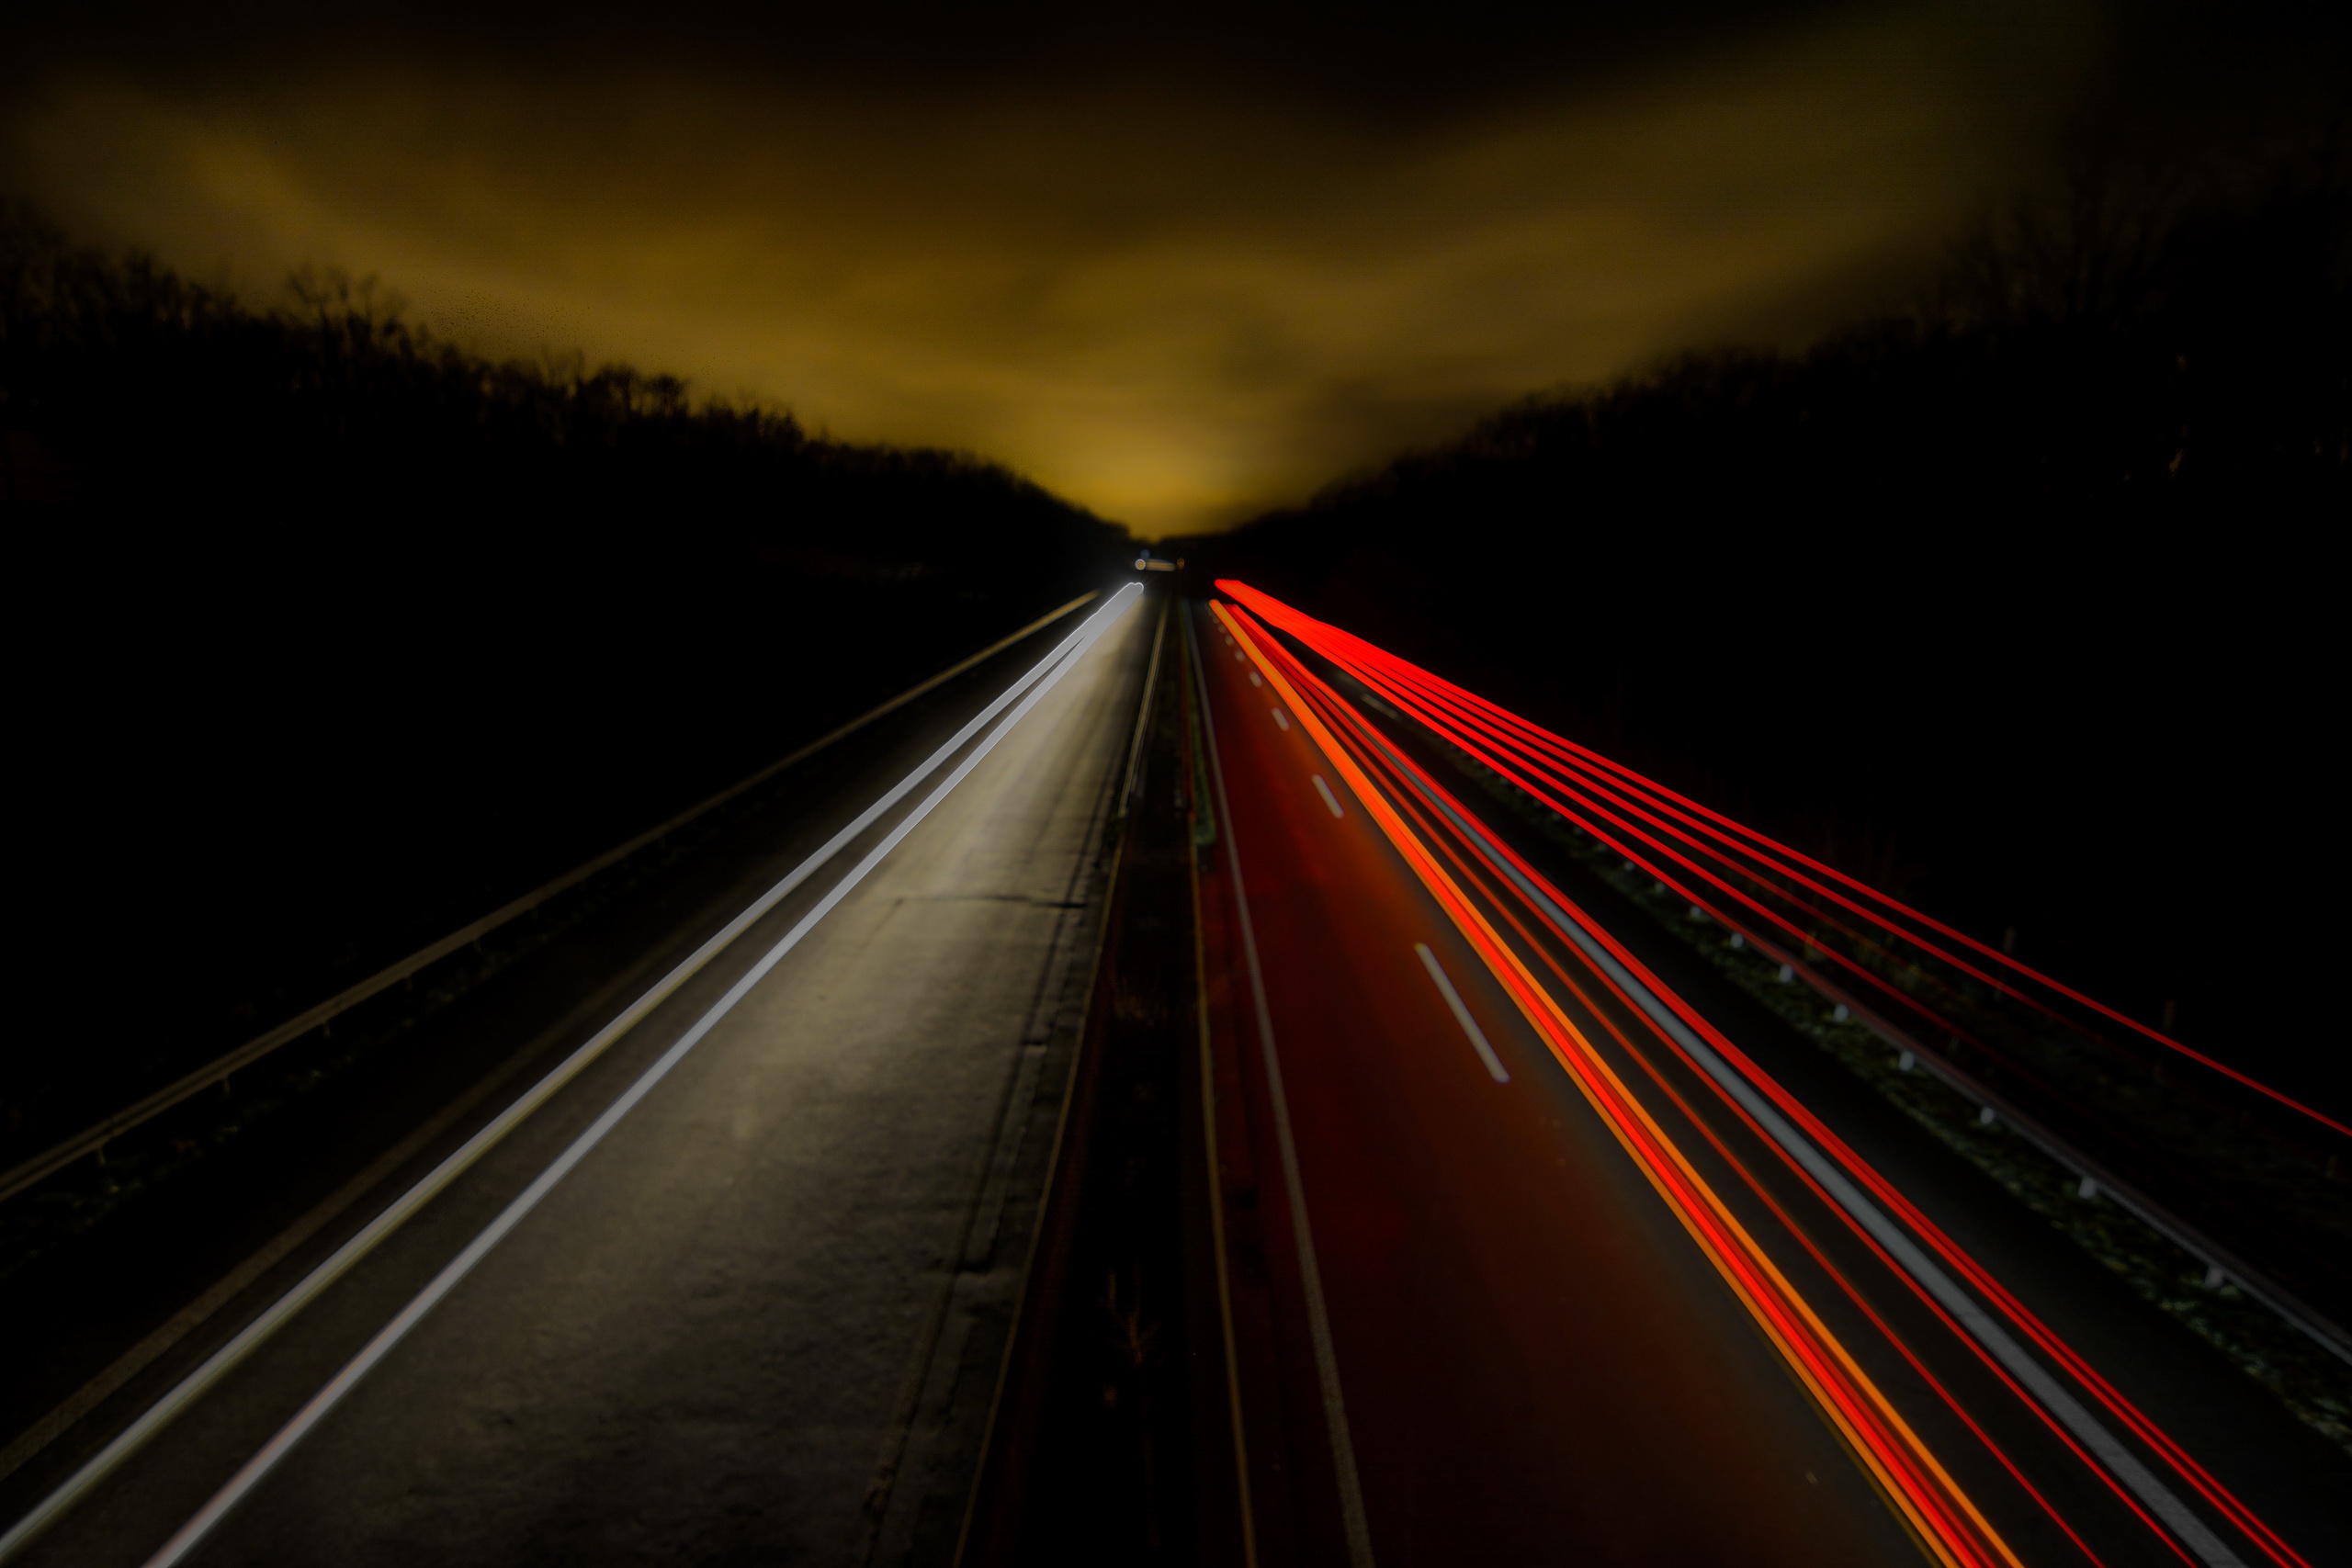 1920x10802019410 Time Lapse Night Road 1920x10802019410 Resolution